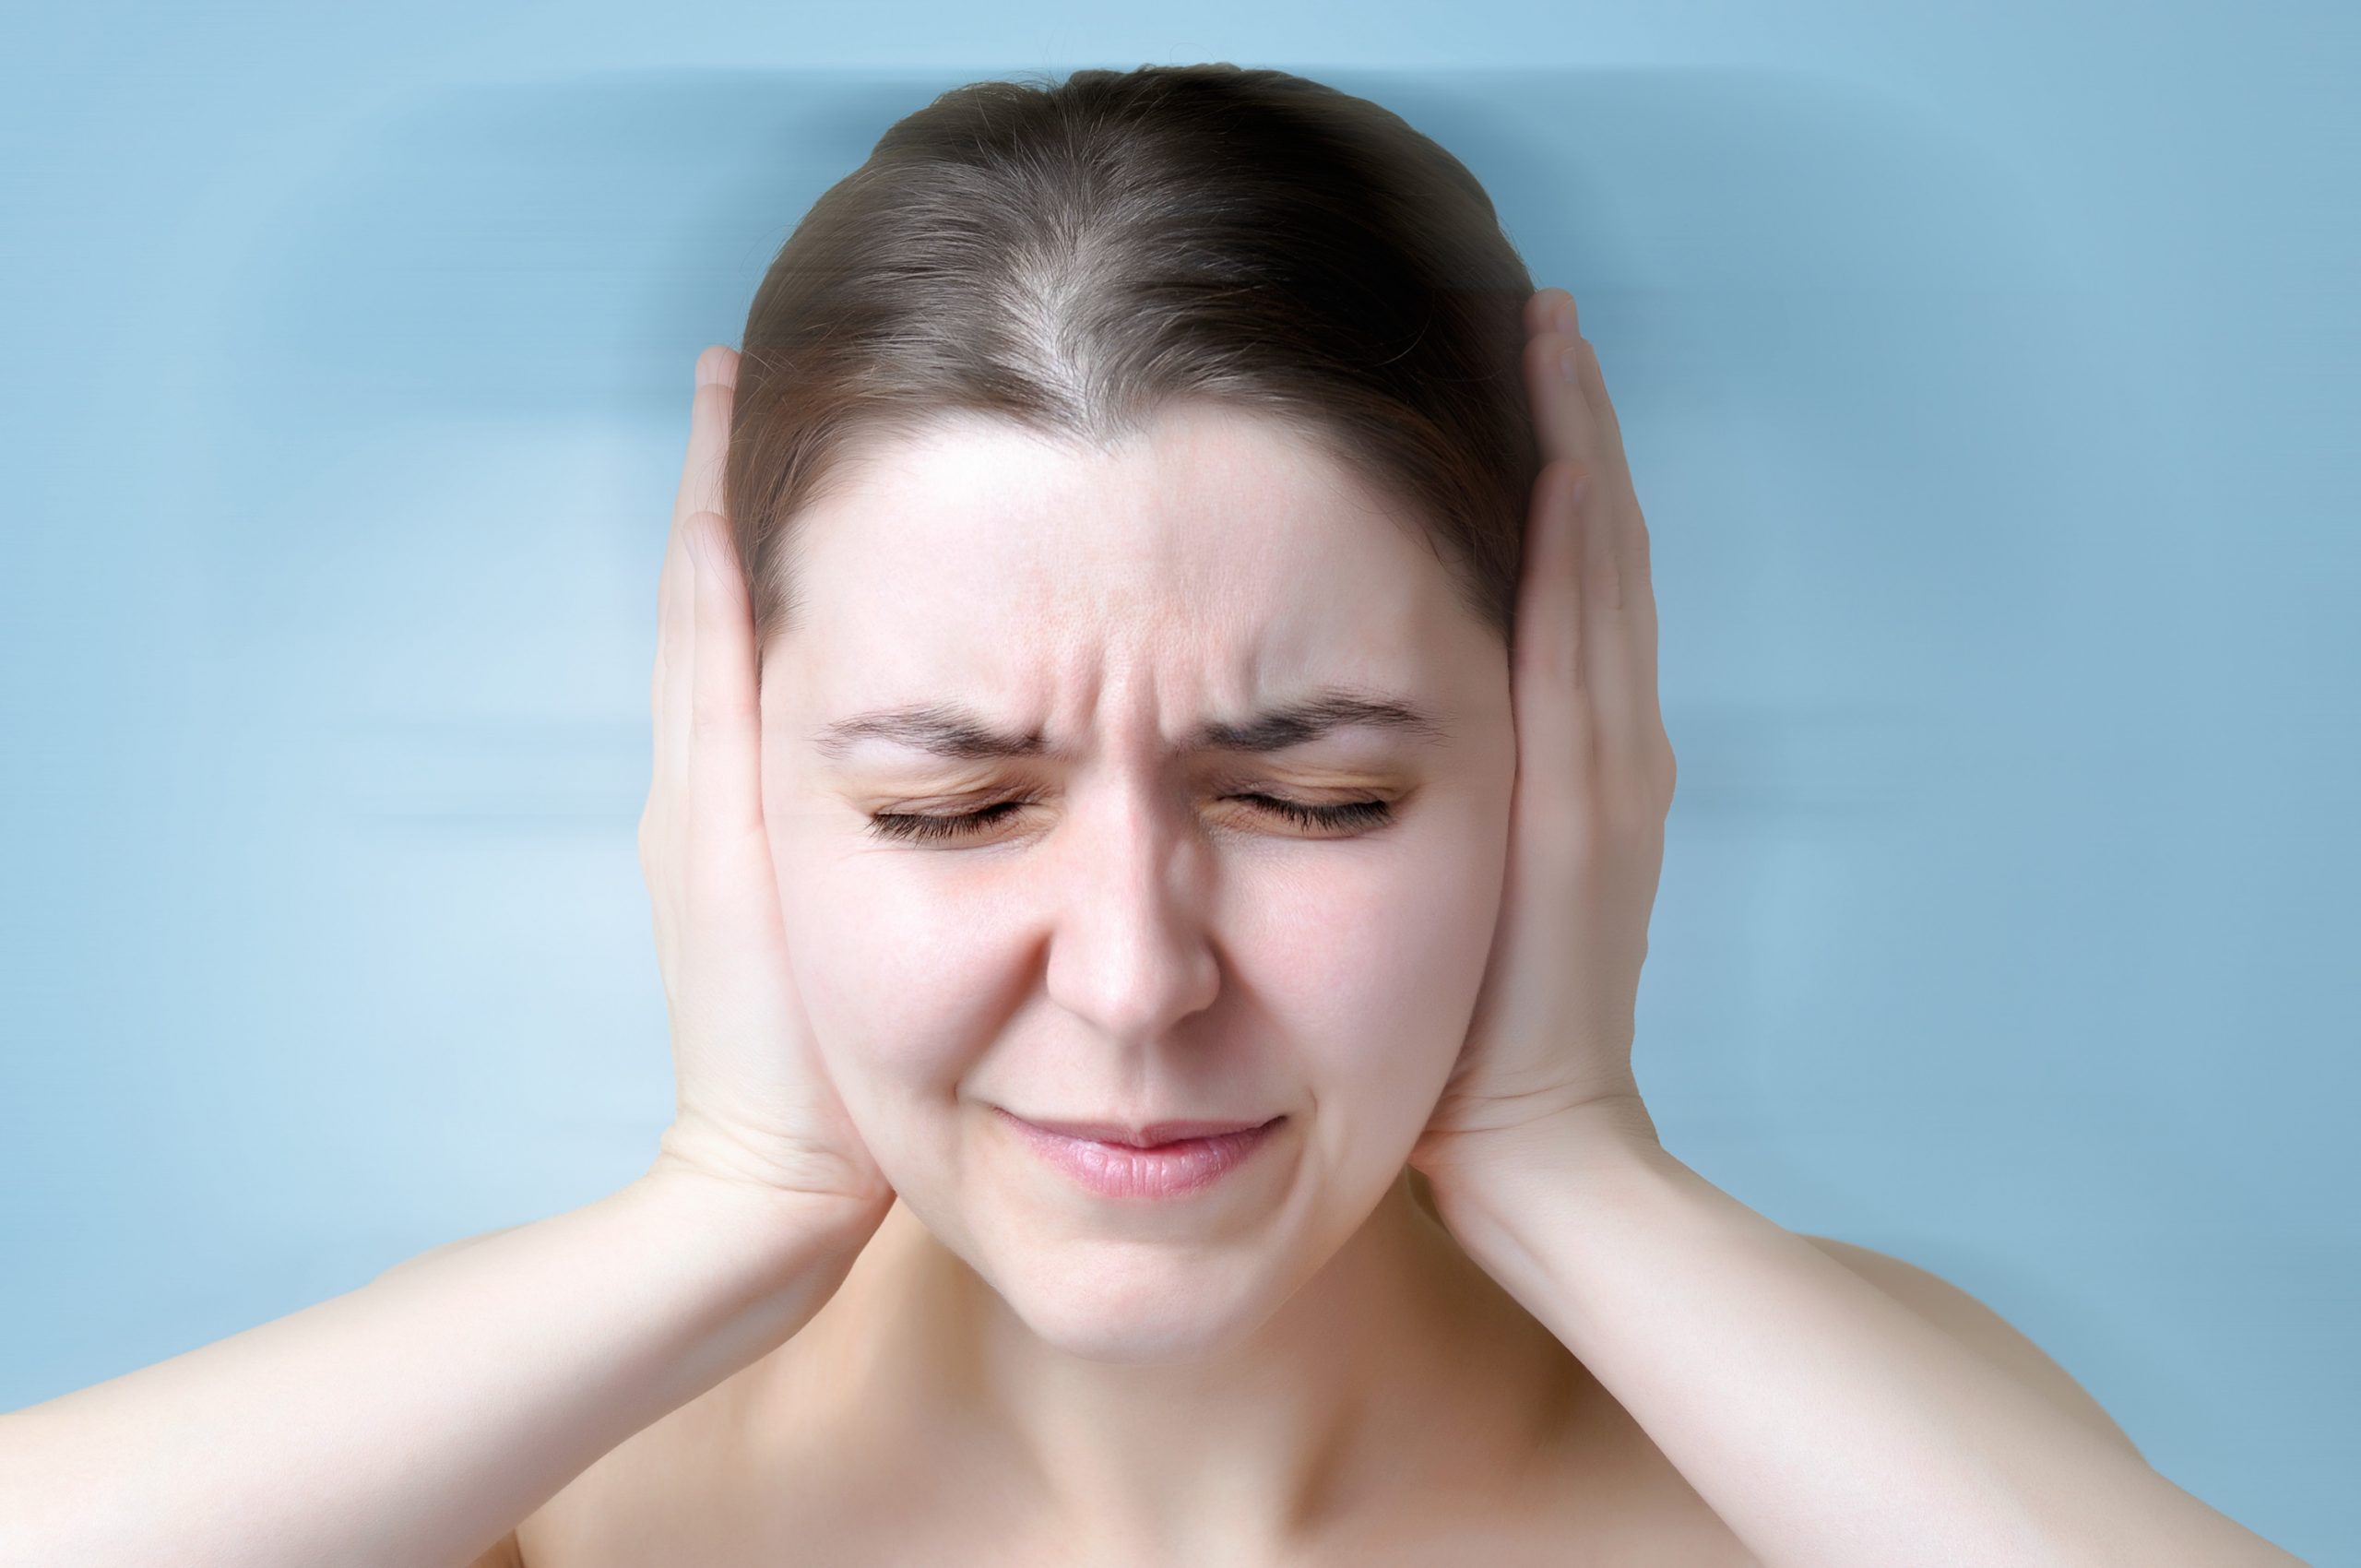 Tinnitus Causes, Types And Treatment Options